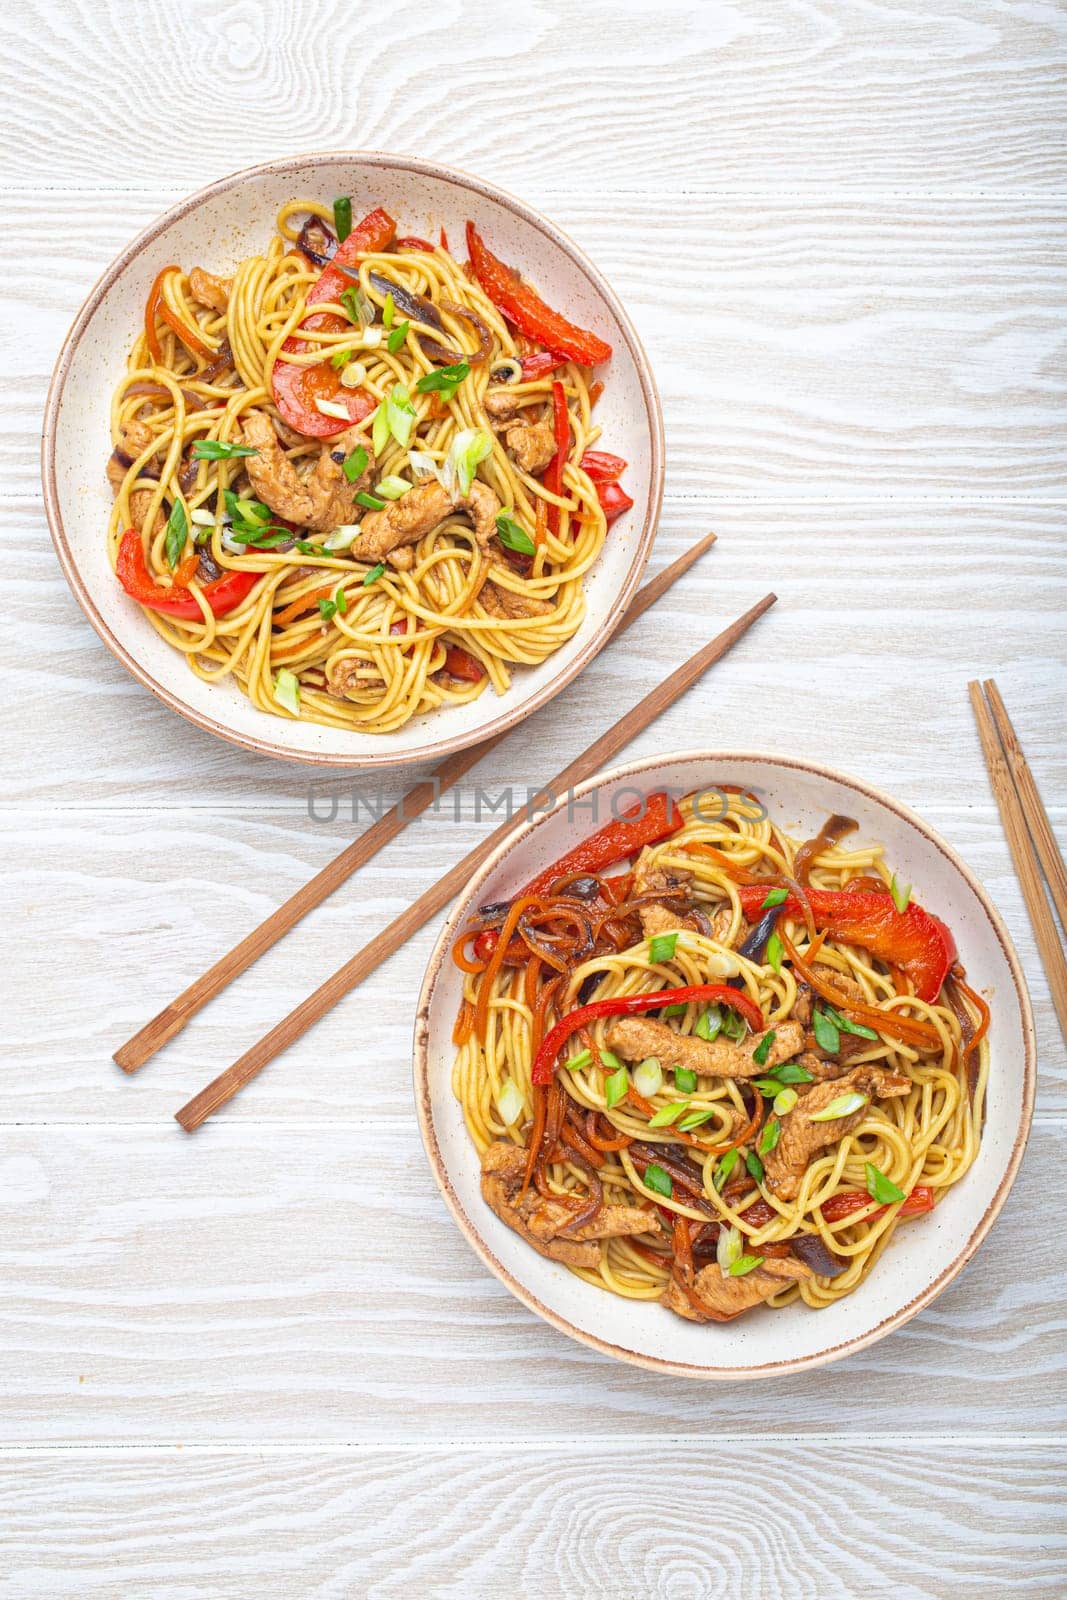 Two bowls with Chow Mein or Lo Mein, traditional Chinese stir fry noodles with meat and vegetables, served with chopsticks top view on rustic white wooden background table.